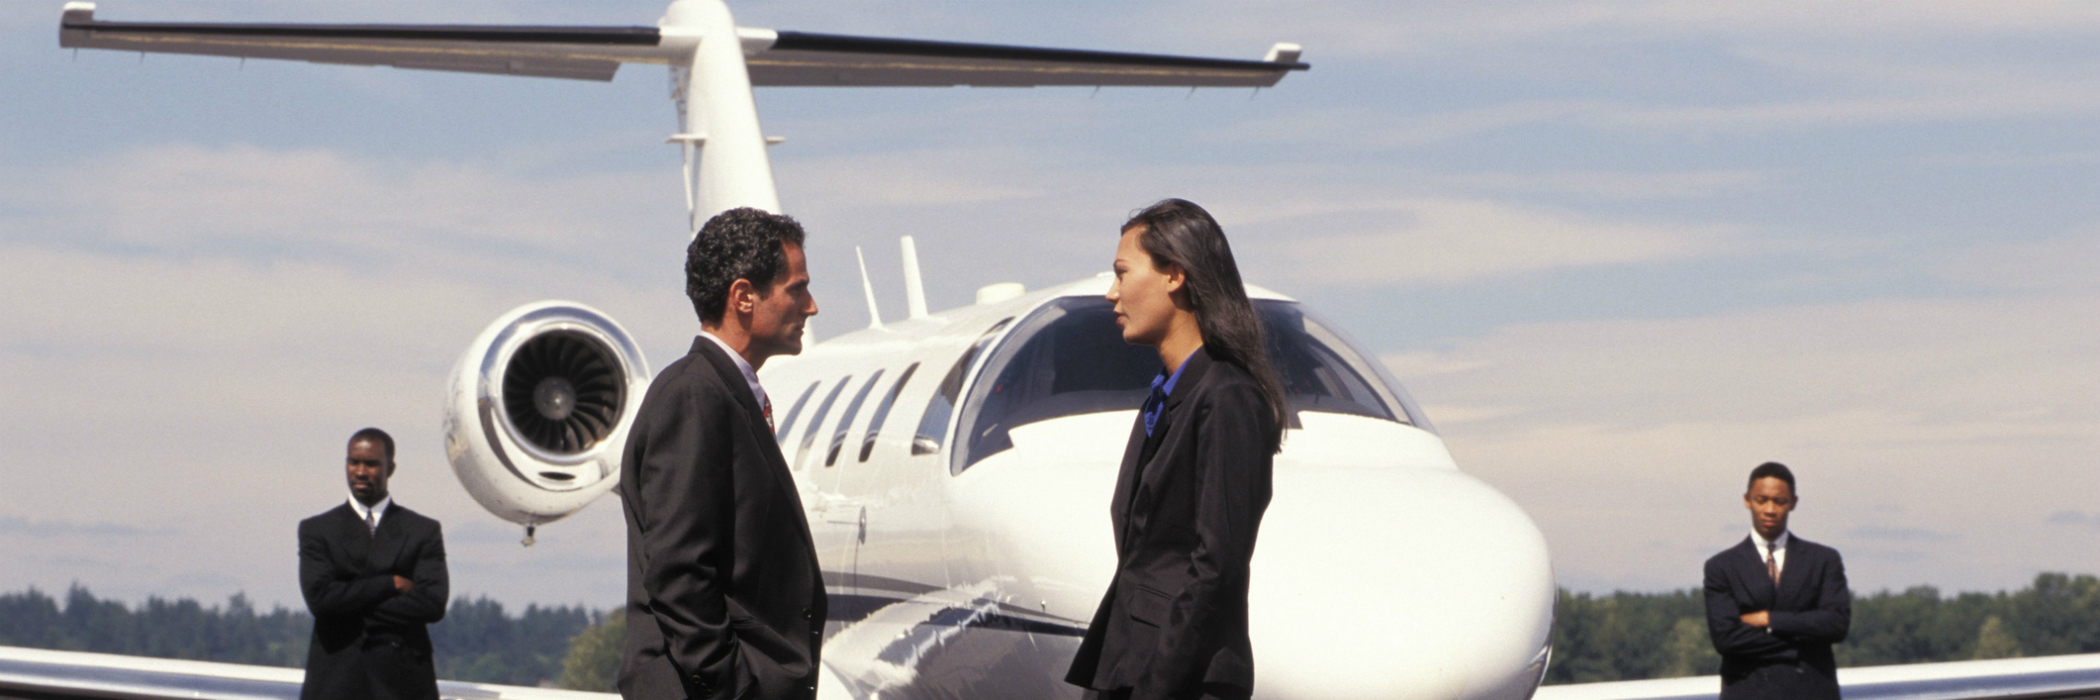 Businesspeople talking on runway in front of private jet